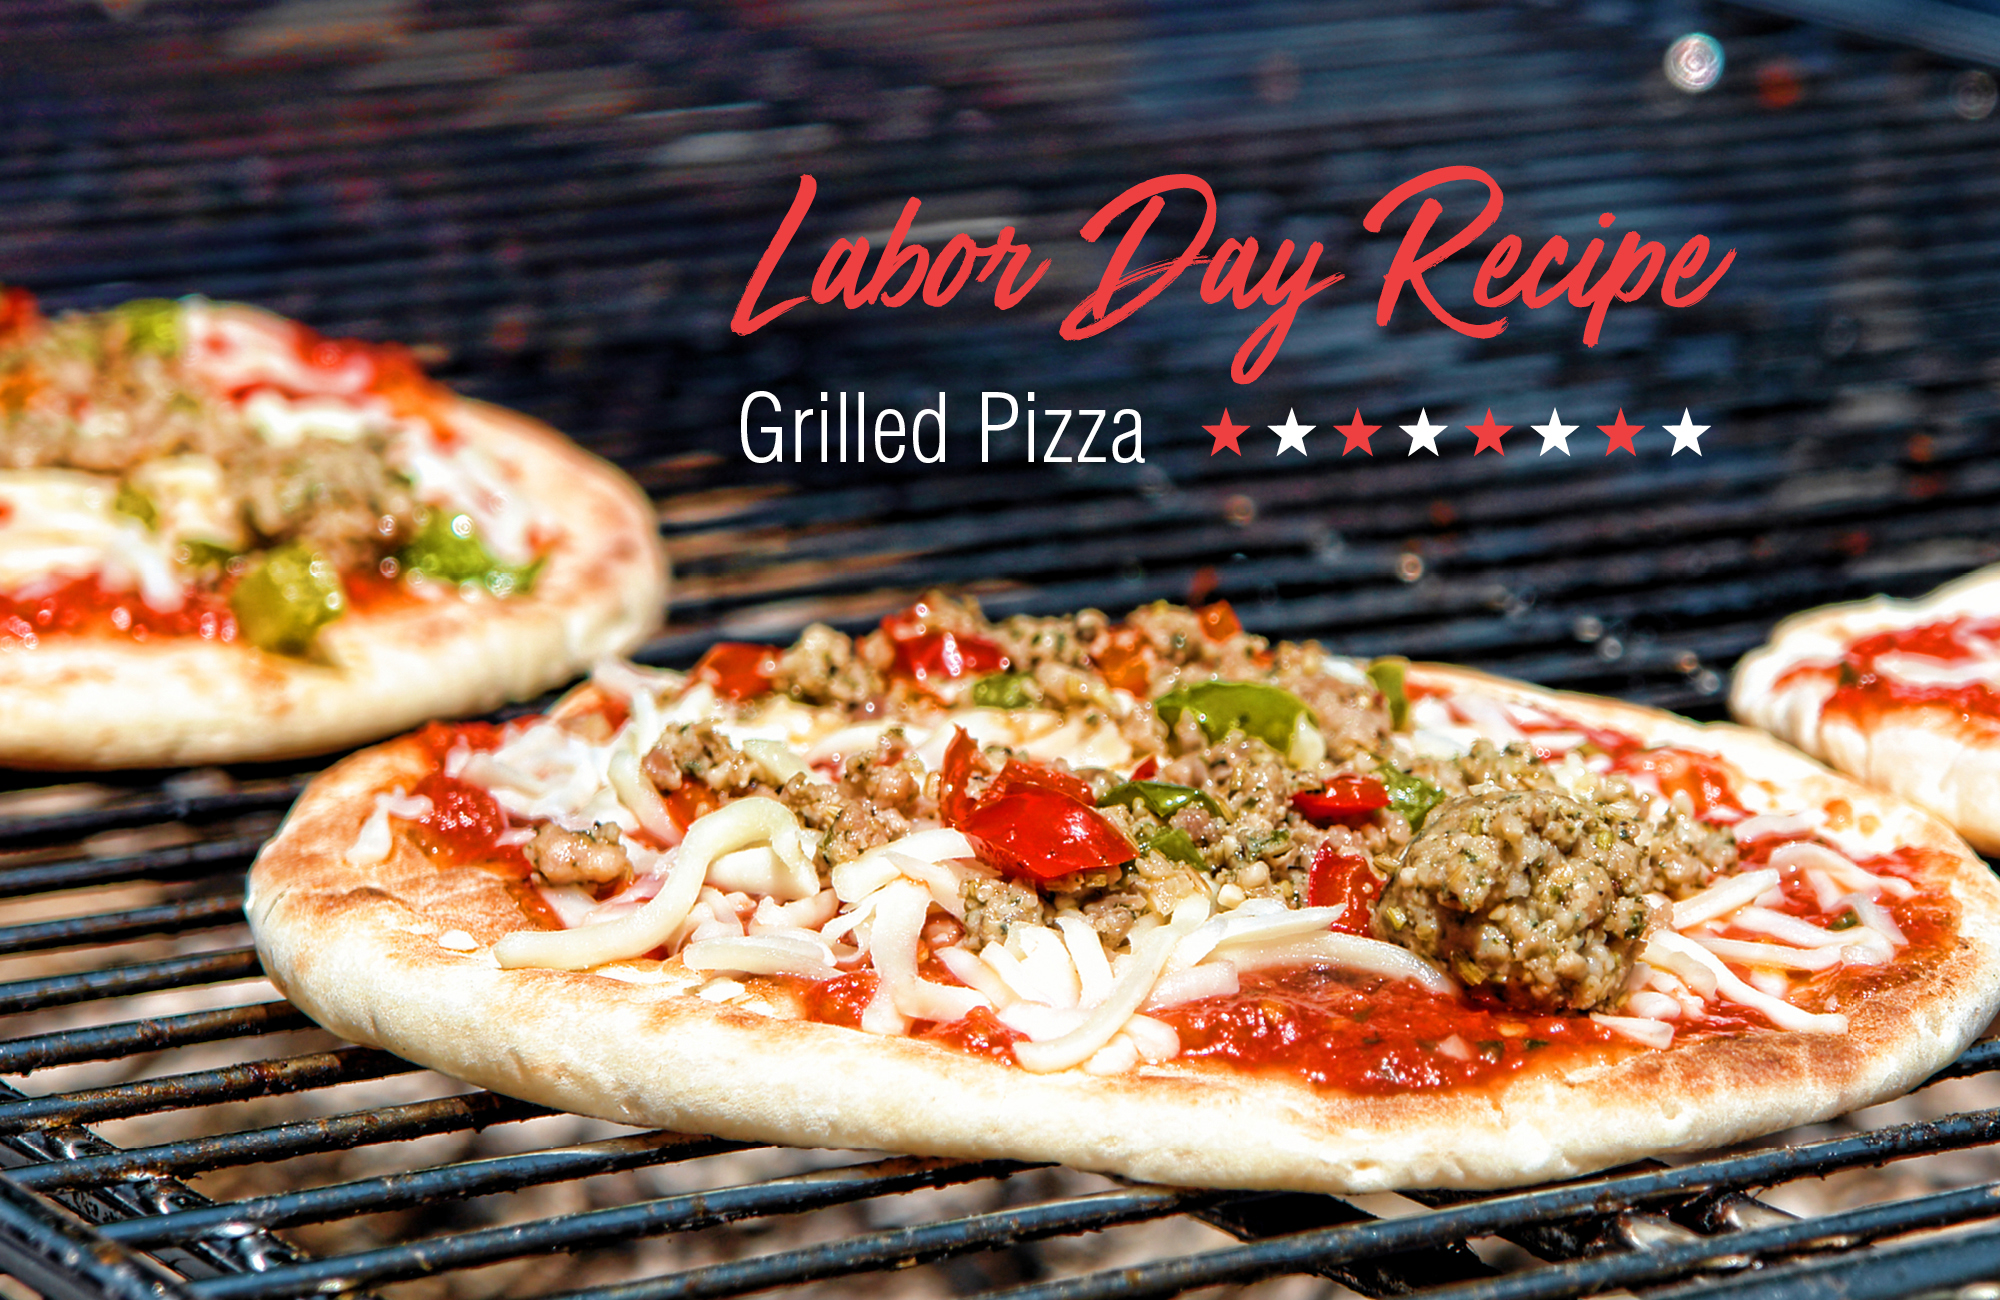 Fire up the grill this Labor Day weekend!